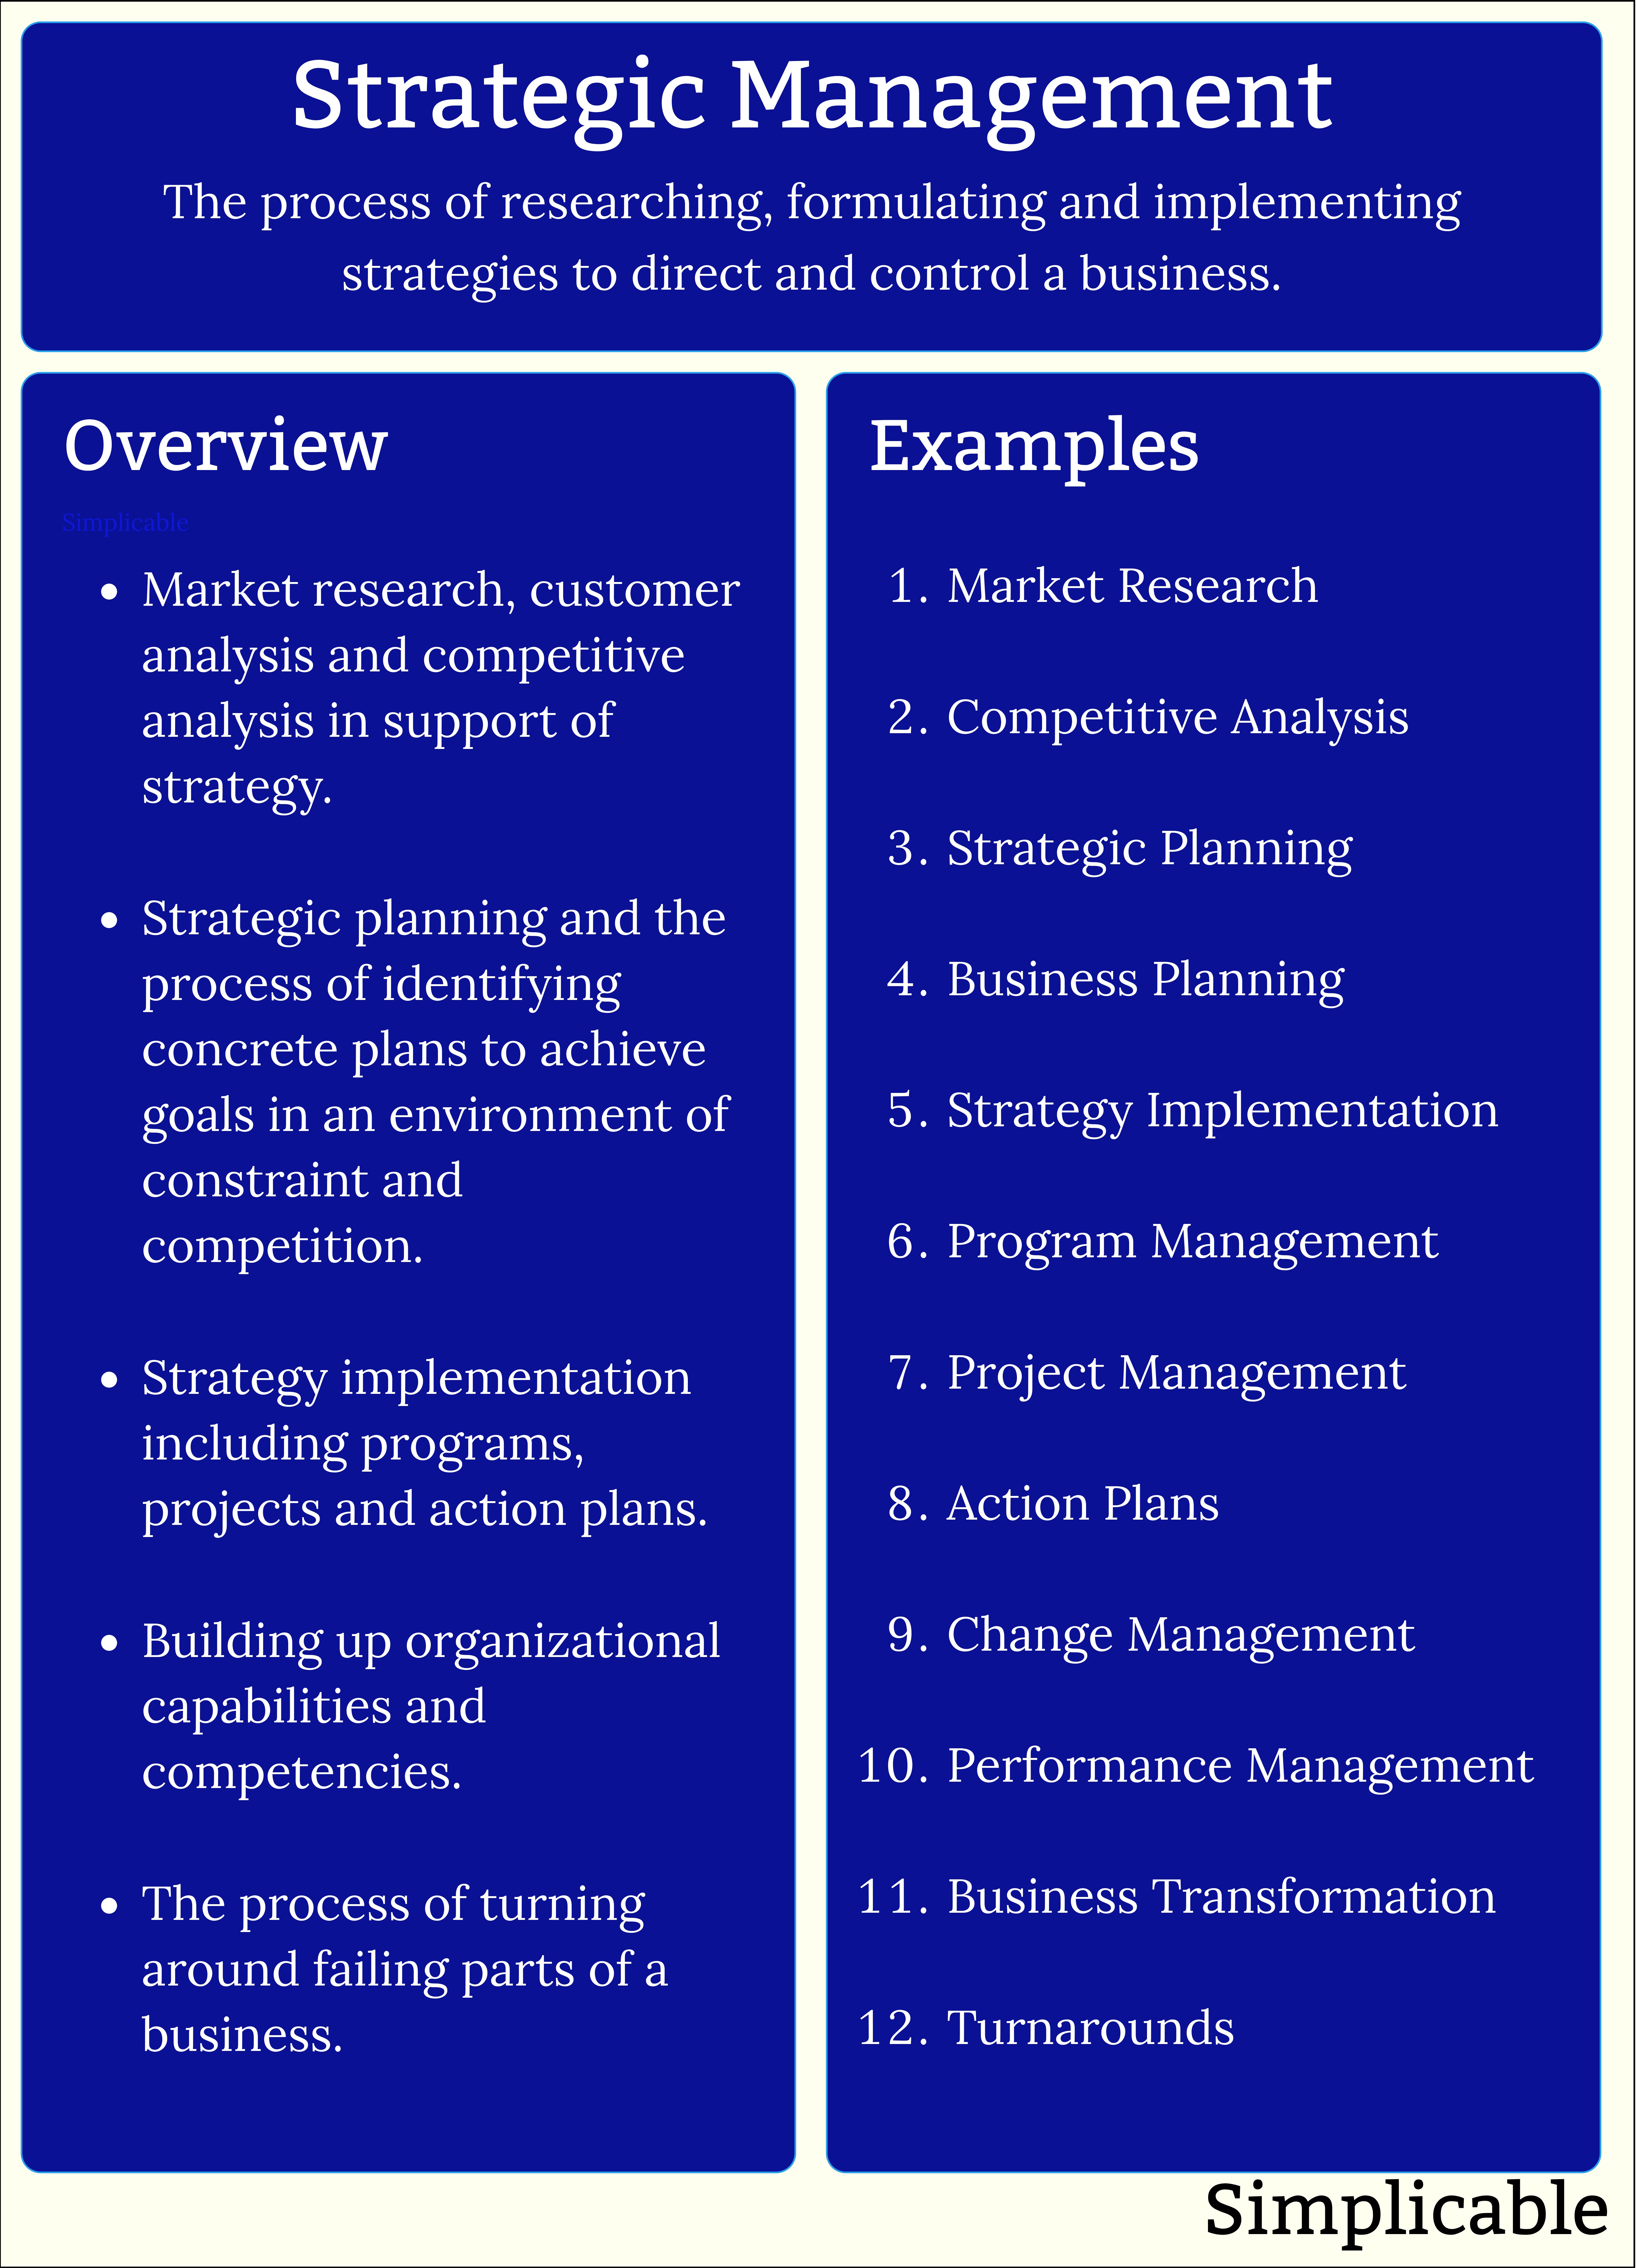 strategic management overview and examples